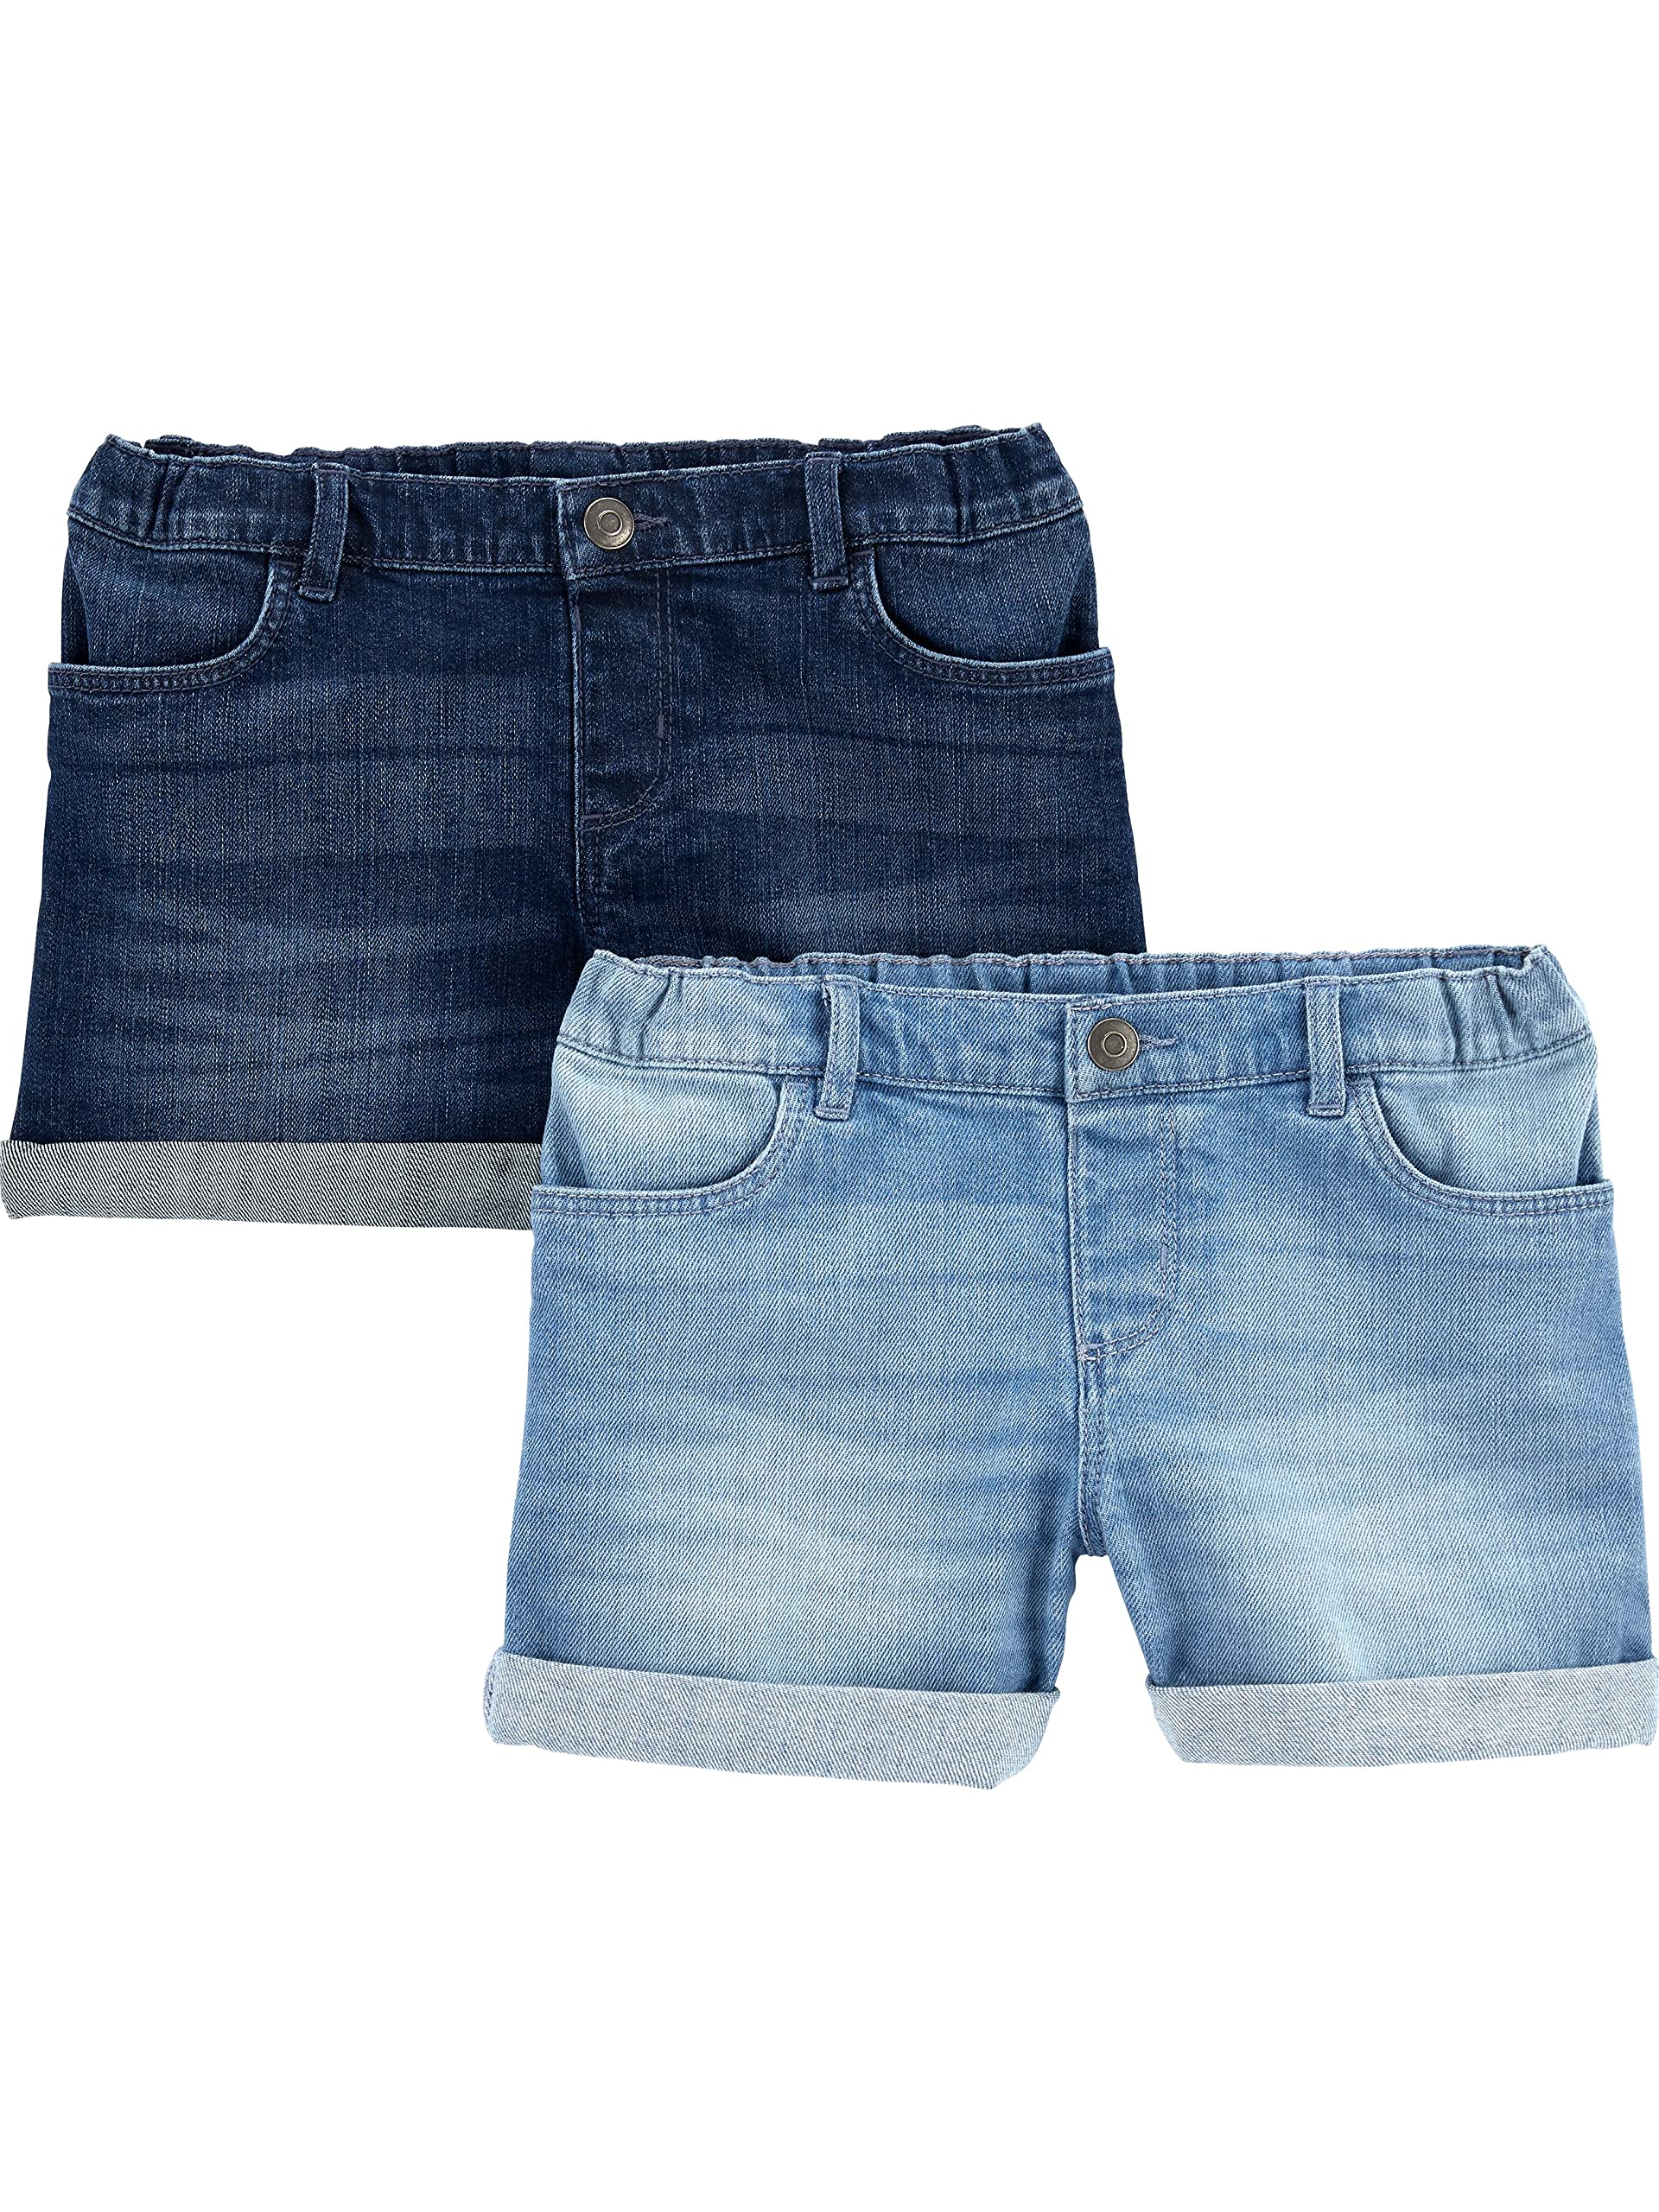 Simple Joys by Carter's Girls' Denim Shorts, Pack of 2